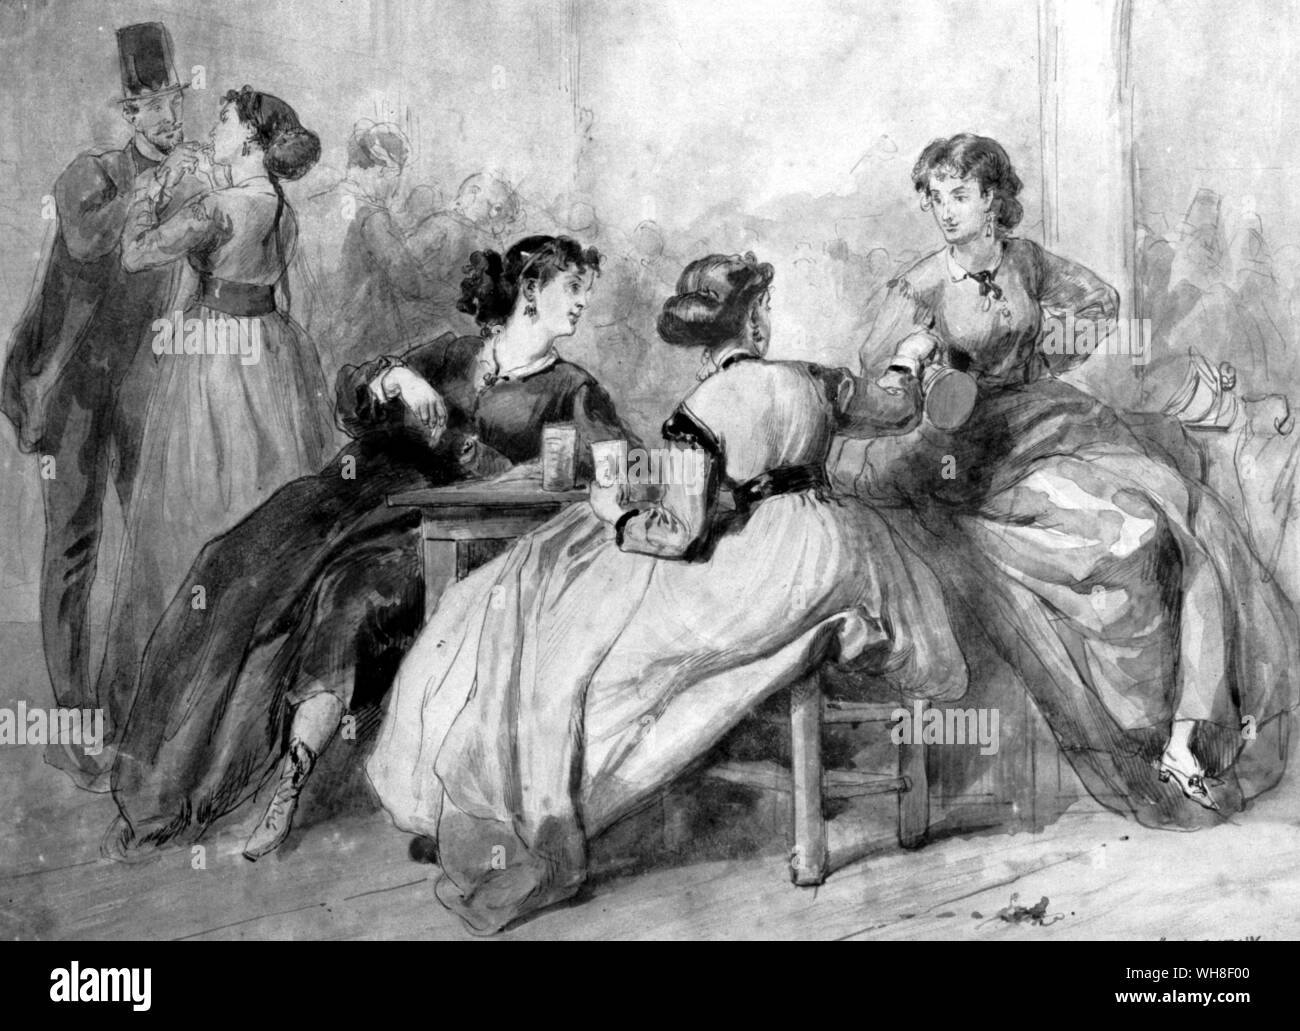 Young Ladies in a Cabaret, by Clément Auguste Andrieux. French illustrator (1829-1881). Stock Photo